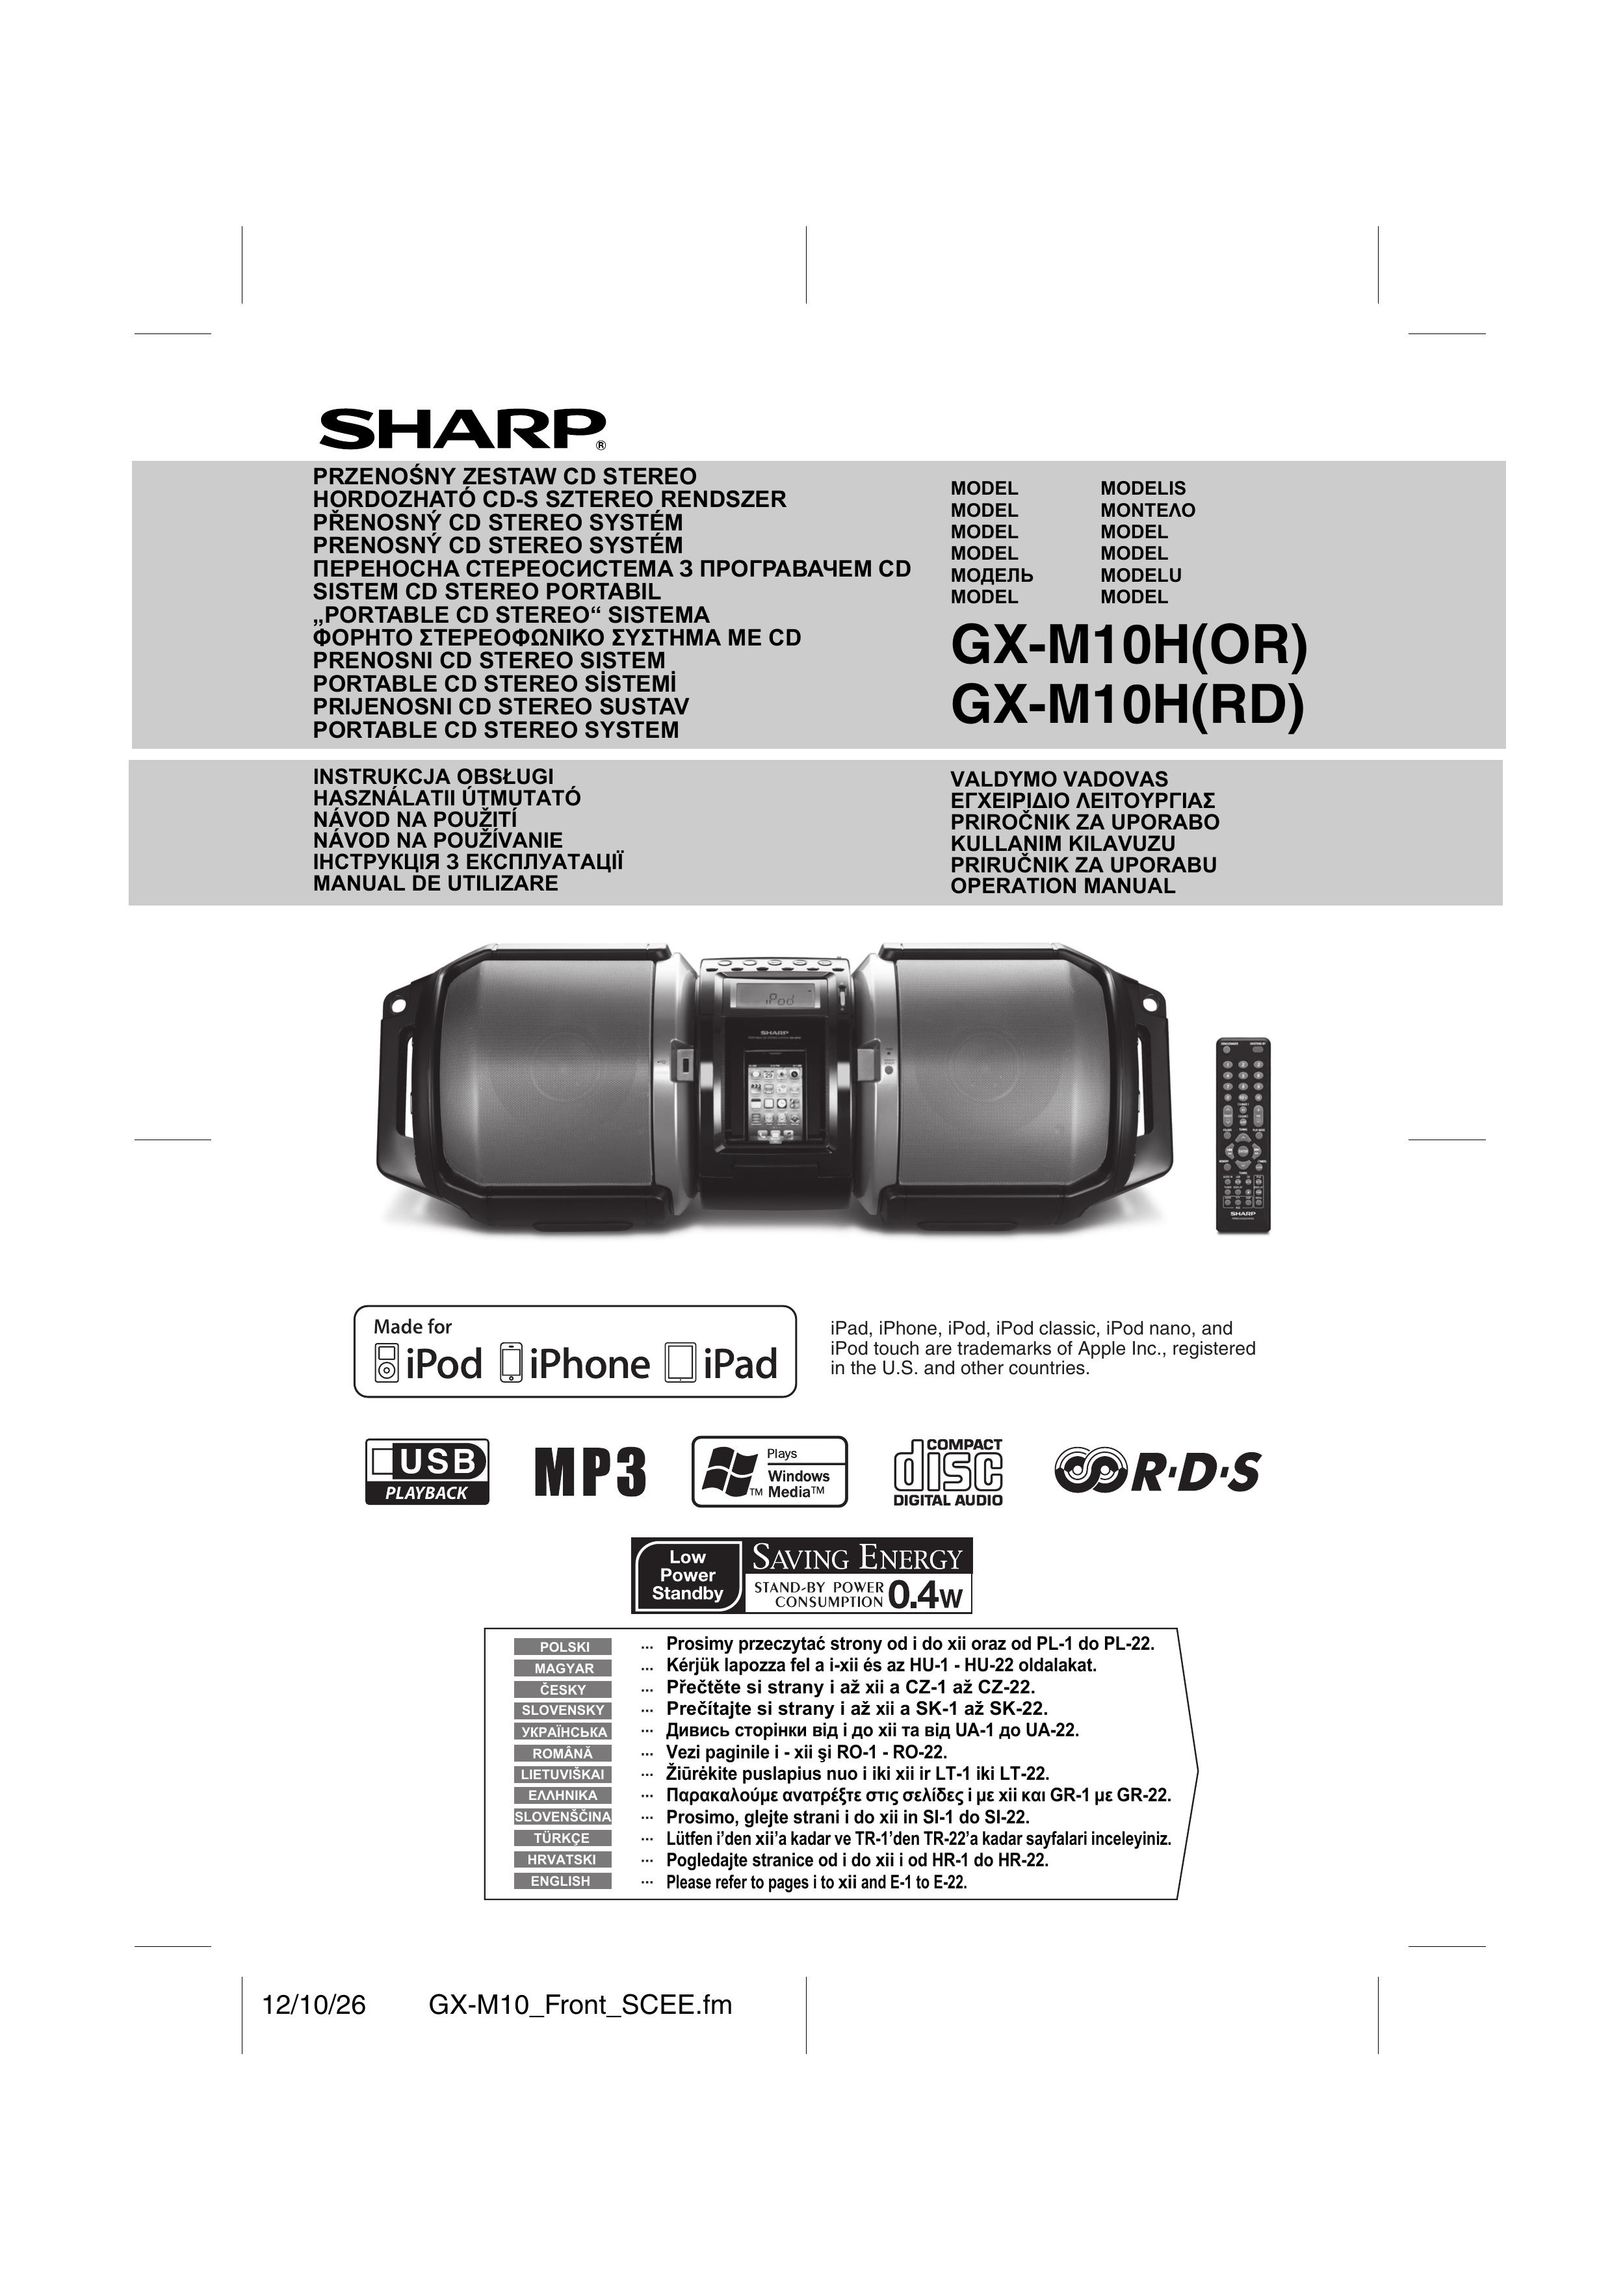 Sharp GX-M10H(OR) Portable Stereo System User Manual